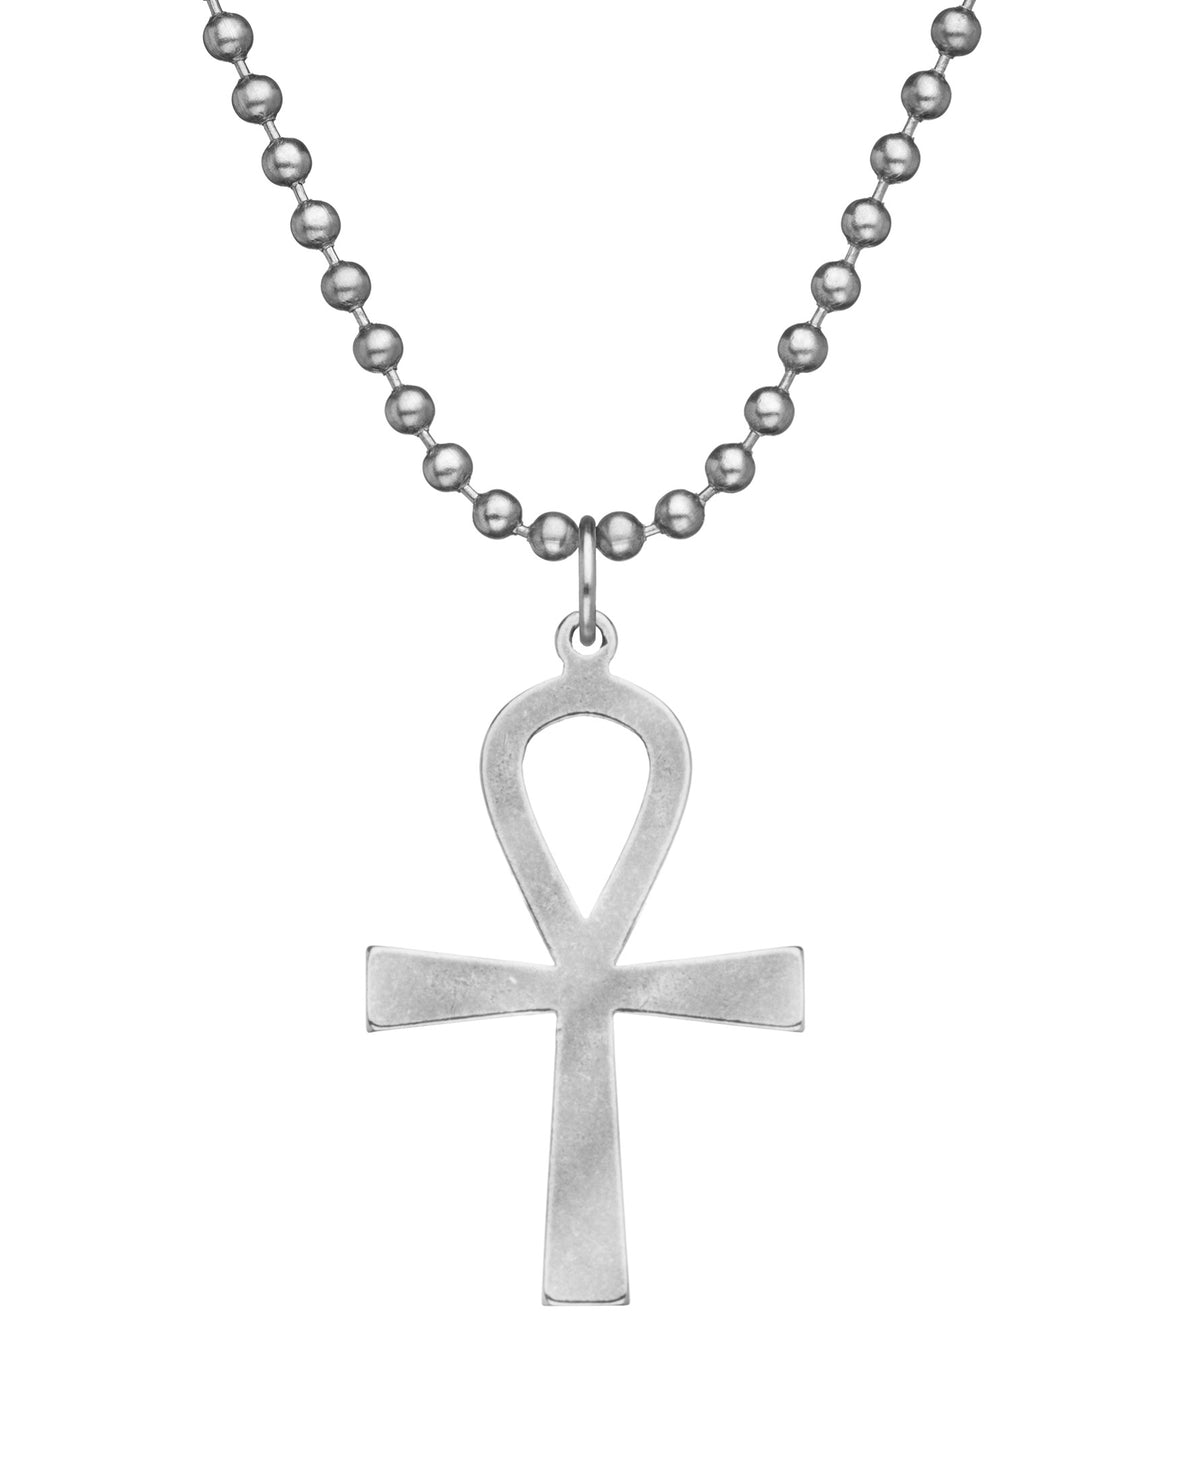 Genuine U.S. Military Issue ANKH Necklace with Dog Tag Chain